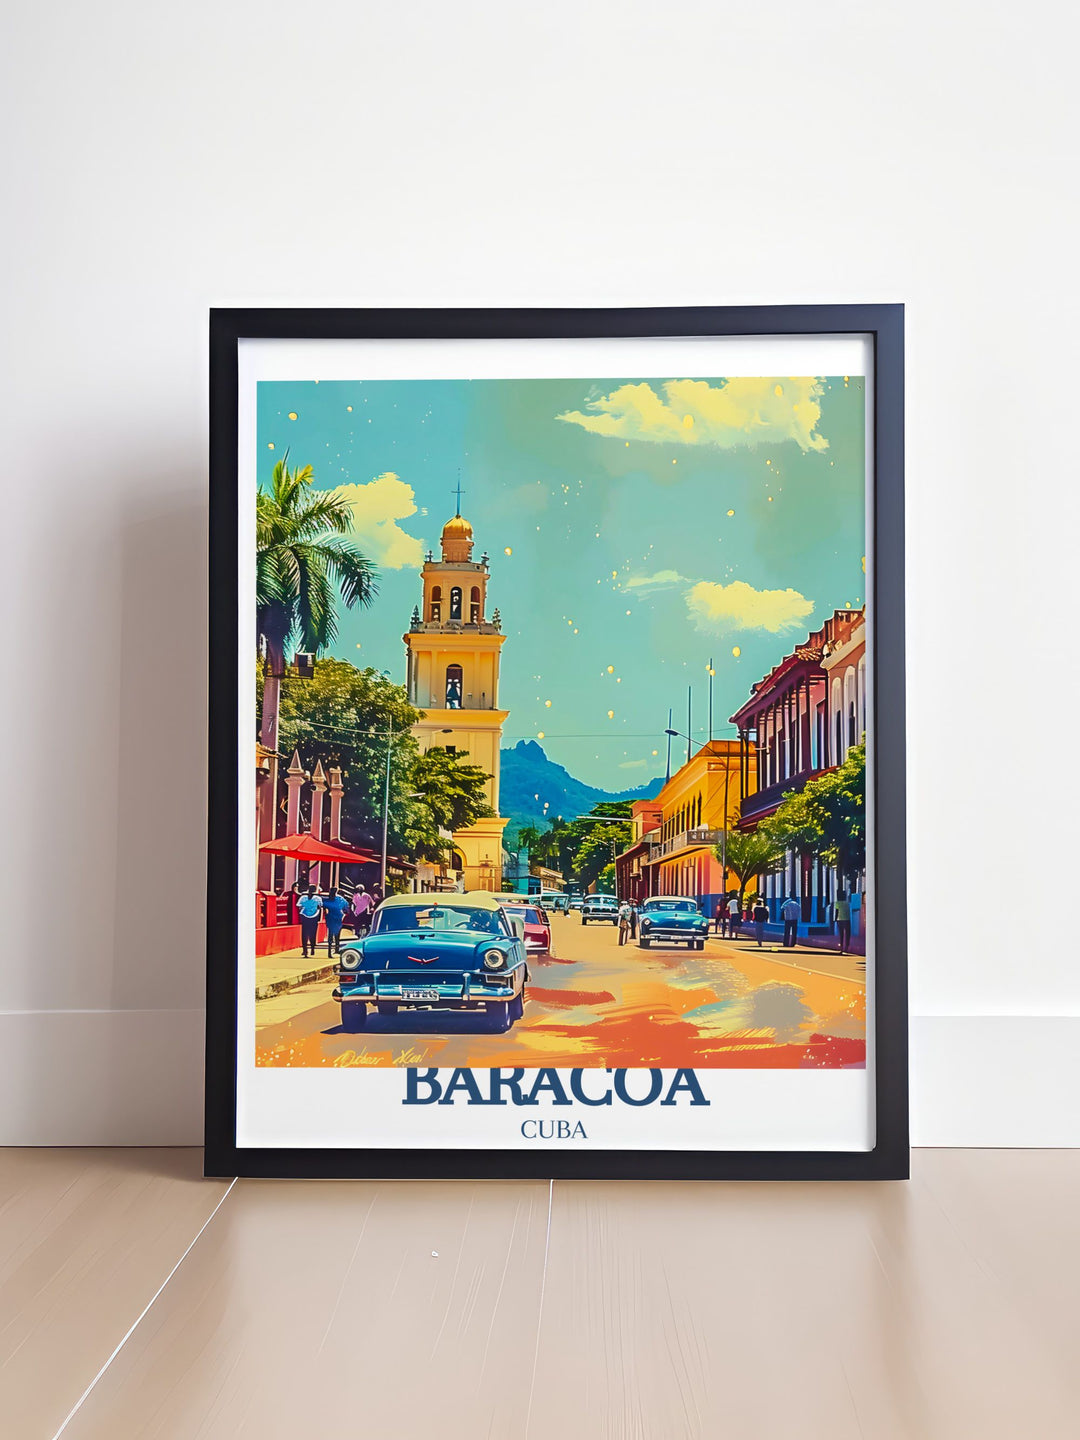 Beautiful Cuba print showcasing Baracoas El Yunque Mountain and the vibrant Catedral De Nuestra Senora De La Asuncion, highlighting its lush vegetation and historic architecture. Ideal for those who love vintage travel art and adding a scenic touch to their living space.